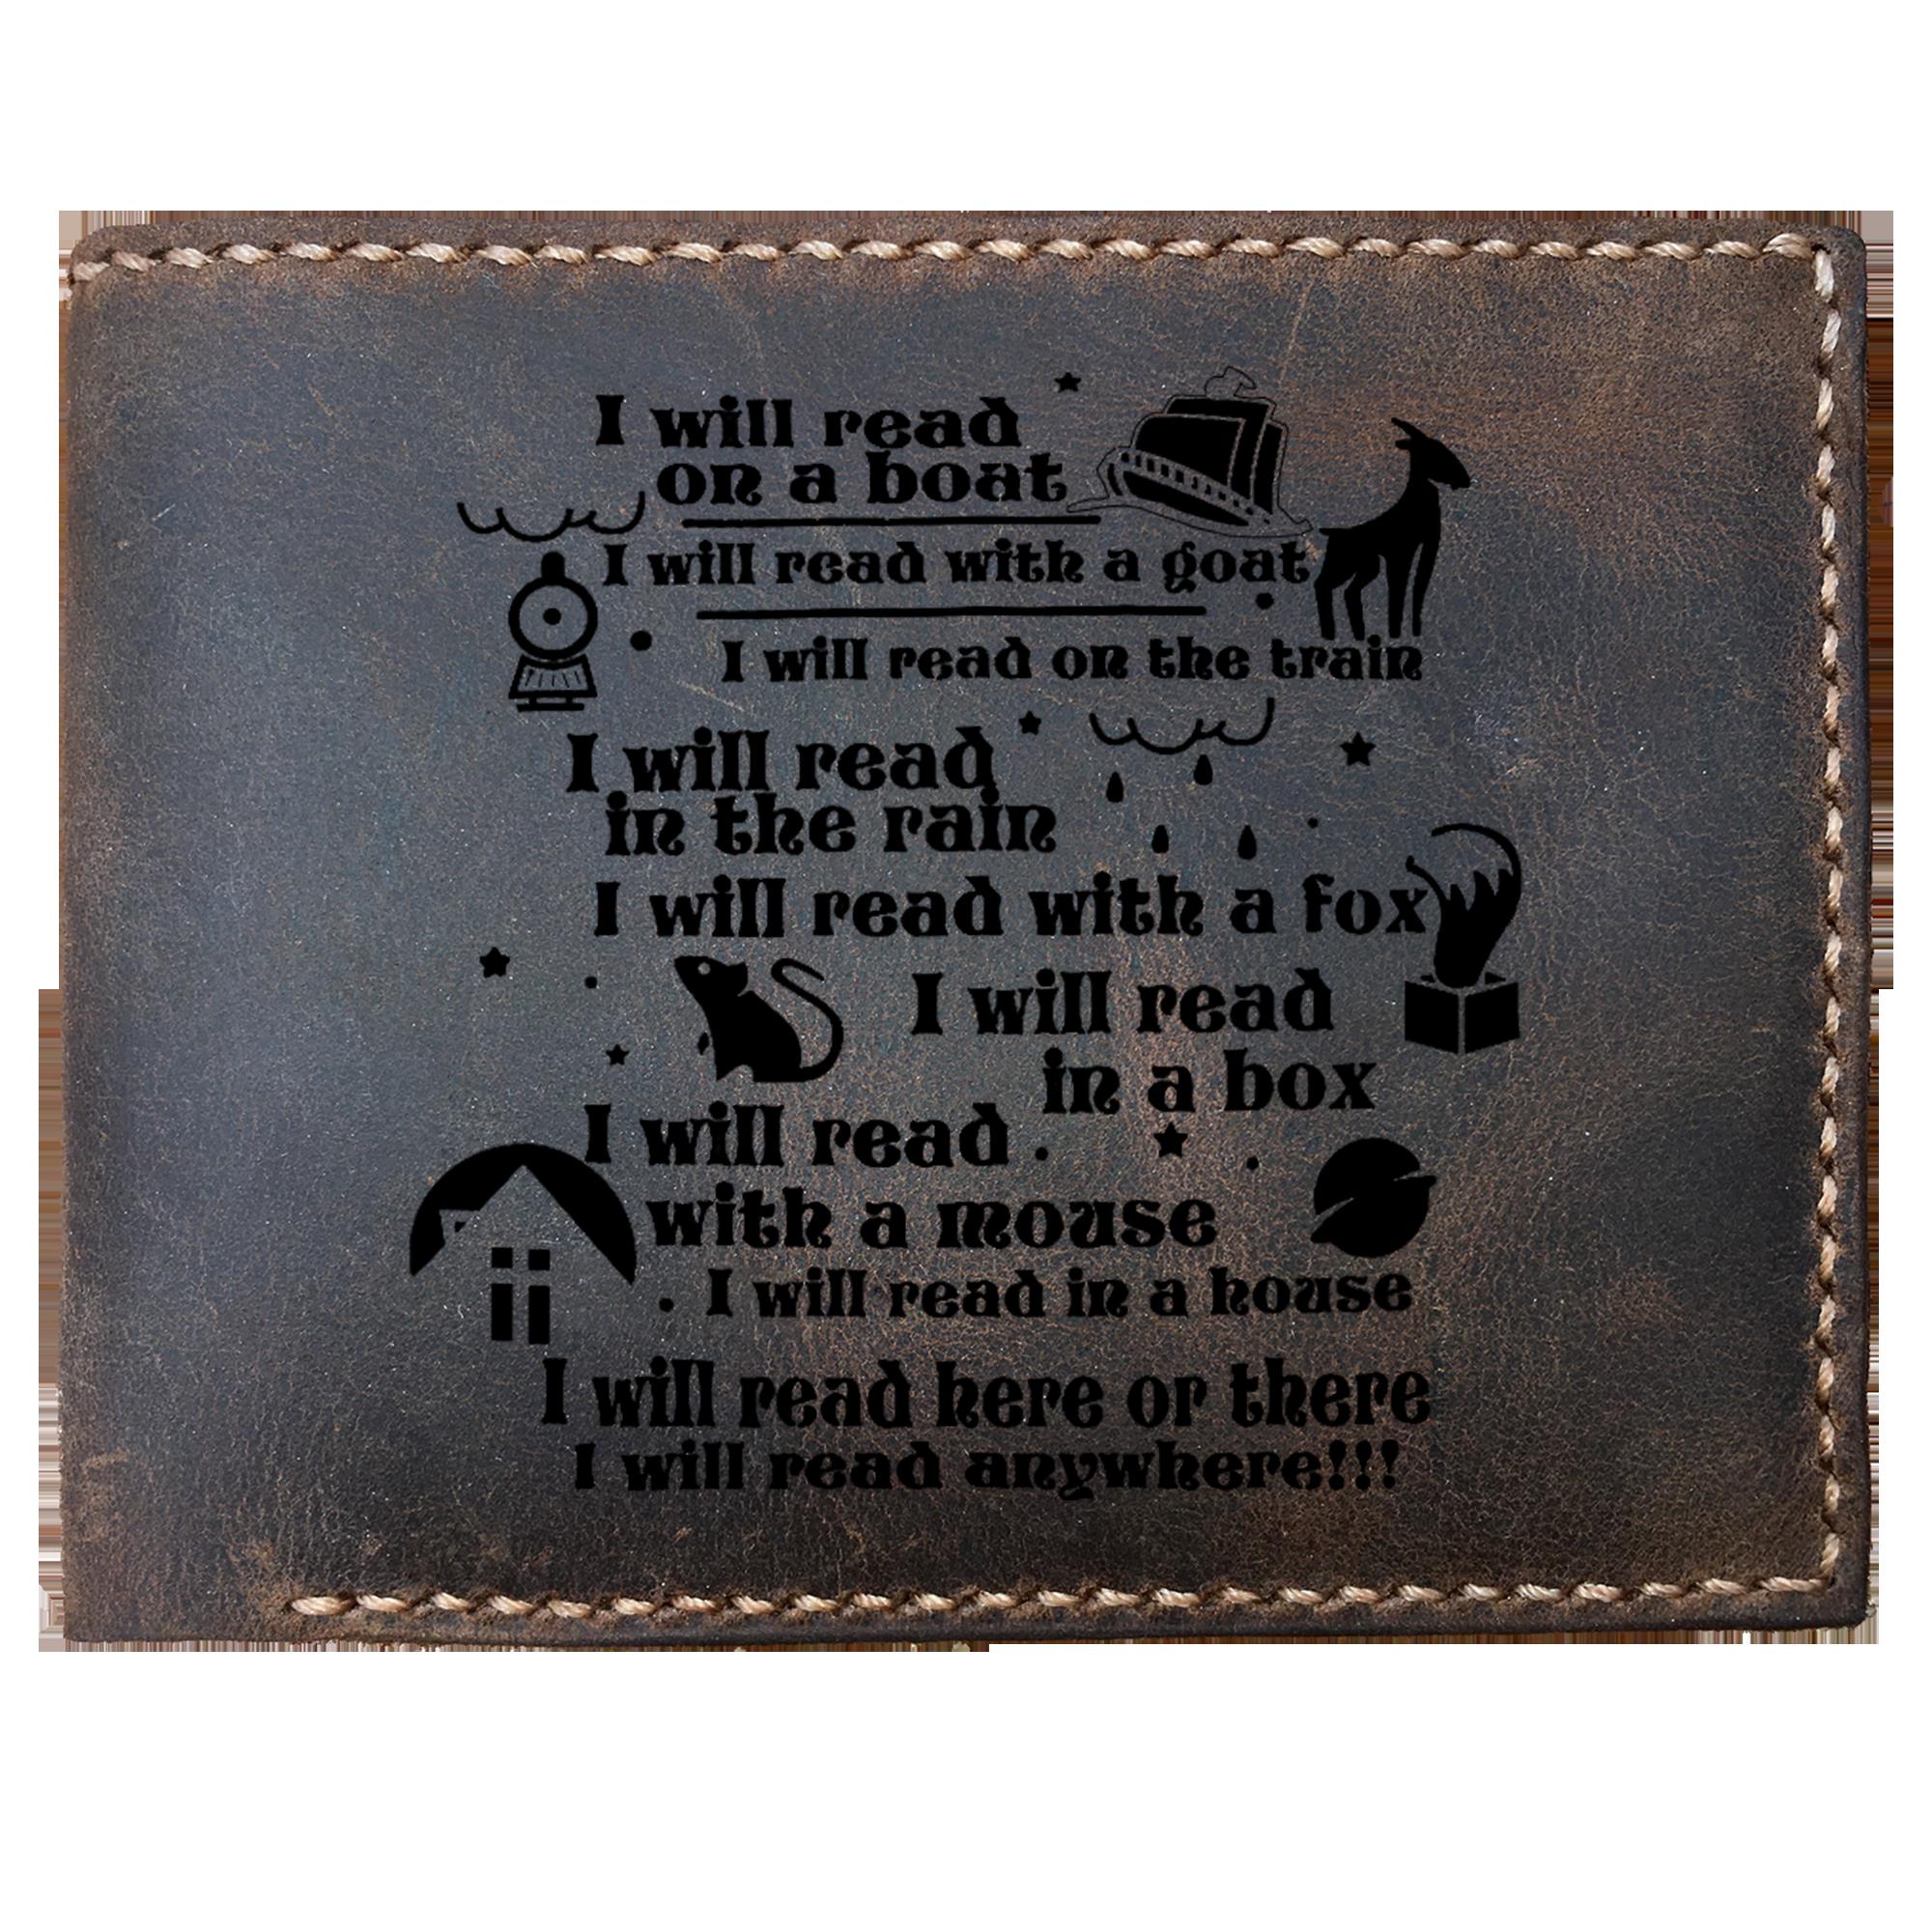 Skitongifts Funny Custom Laser Engraved Bifold Leather Wallet For Men, I'll Read Here Or There I'll Read Anywhere